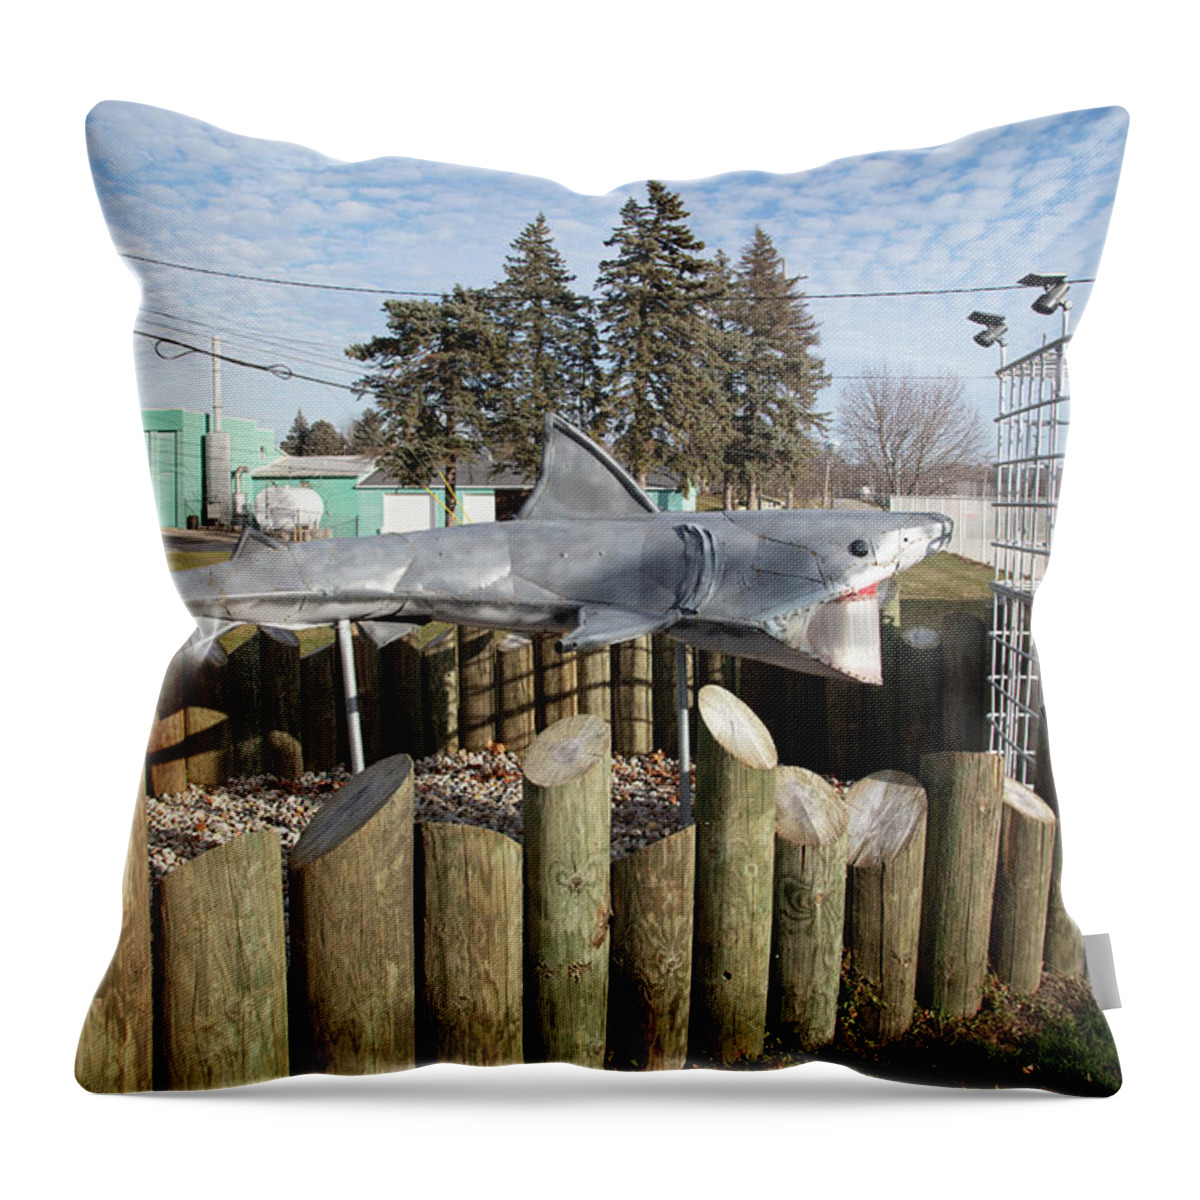 Americana Michigan Throw Pillow featuring the photograph Shark headed into cage in rural Michigan by Eldon McGraw